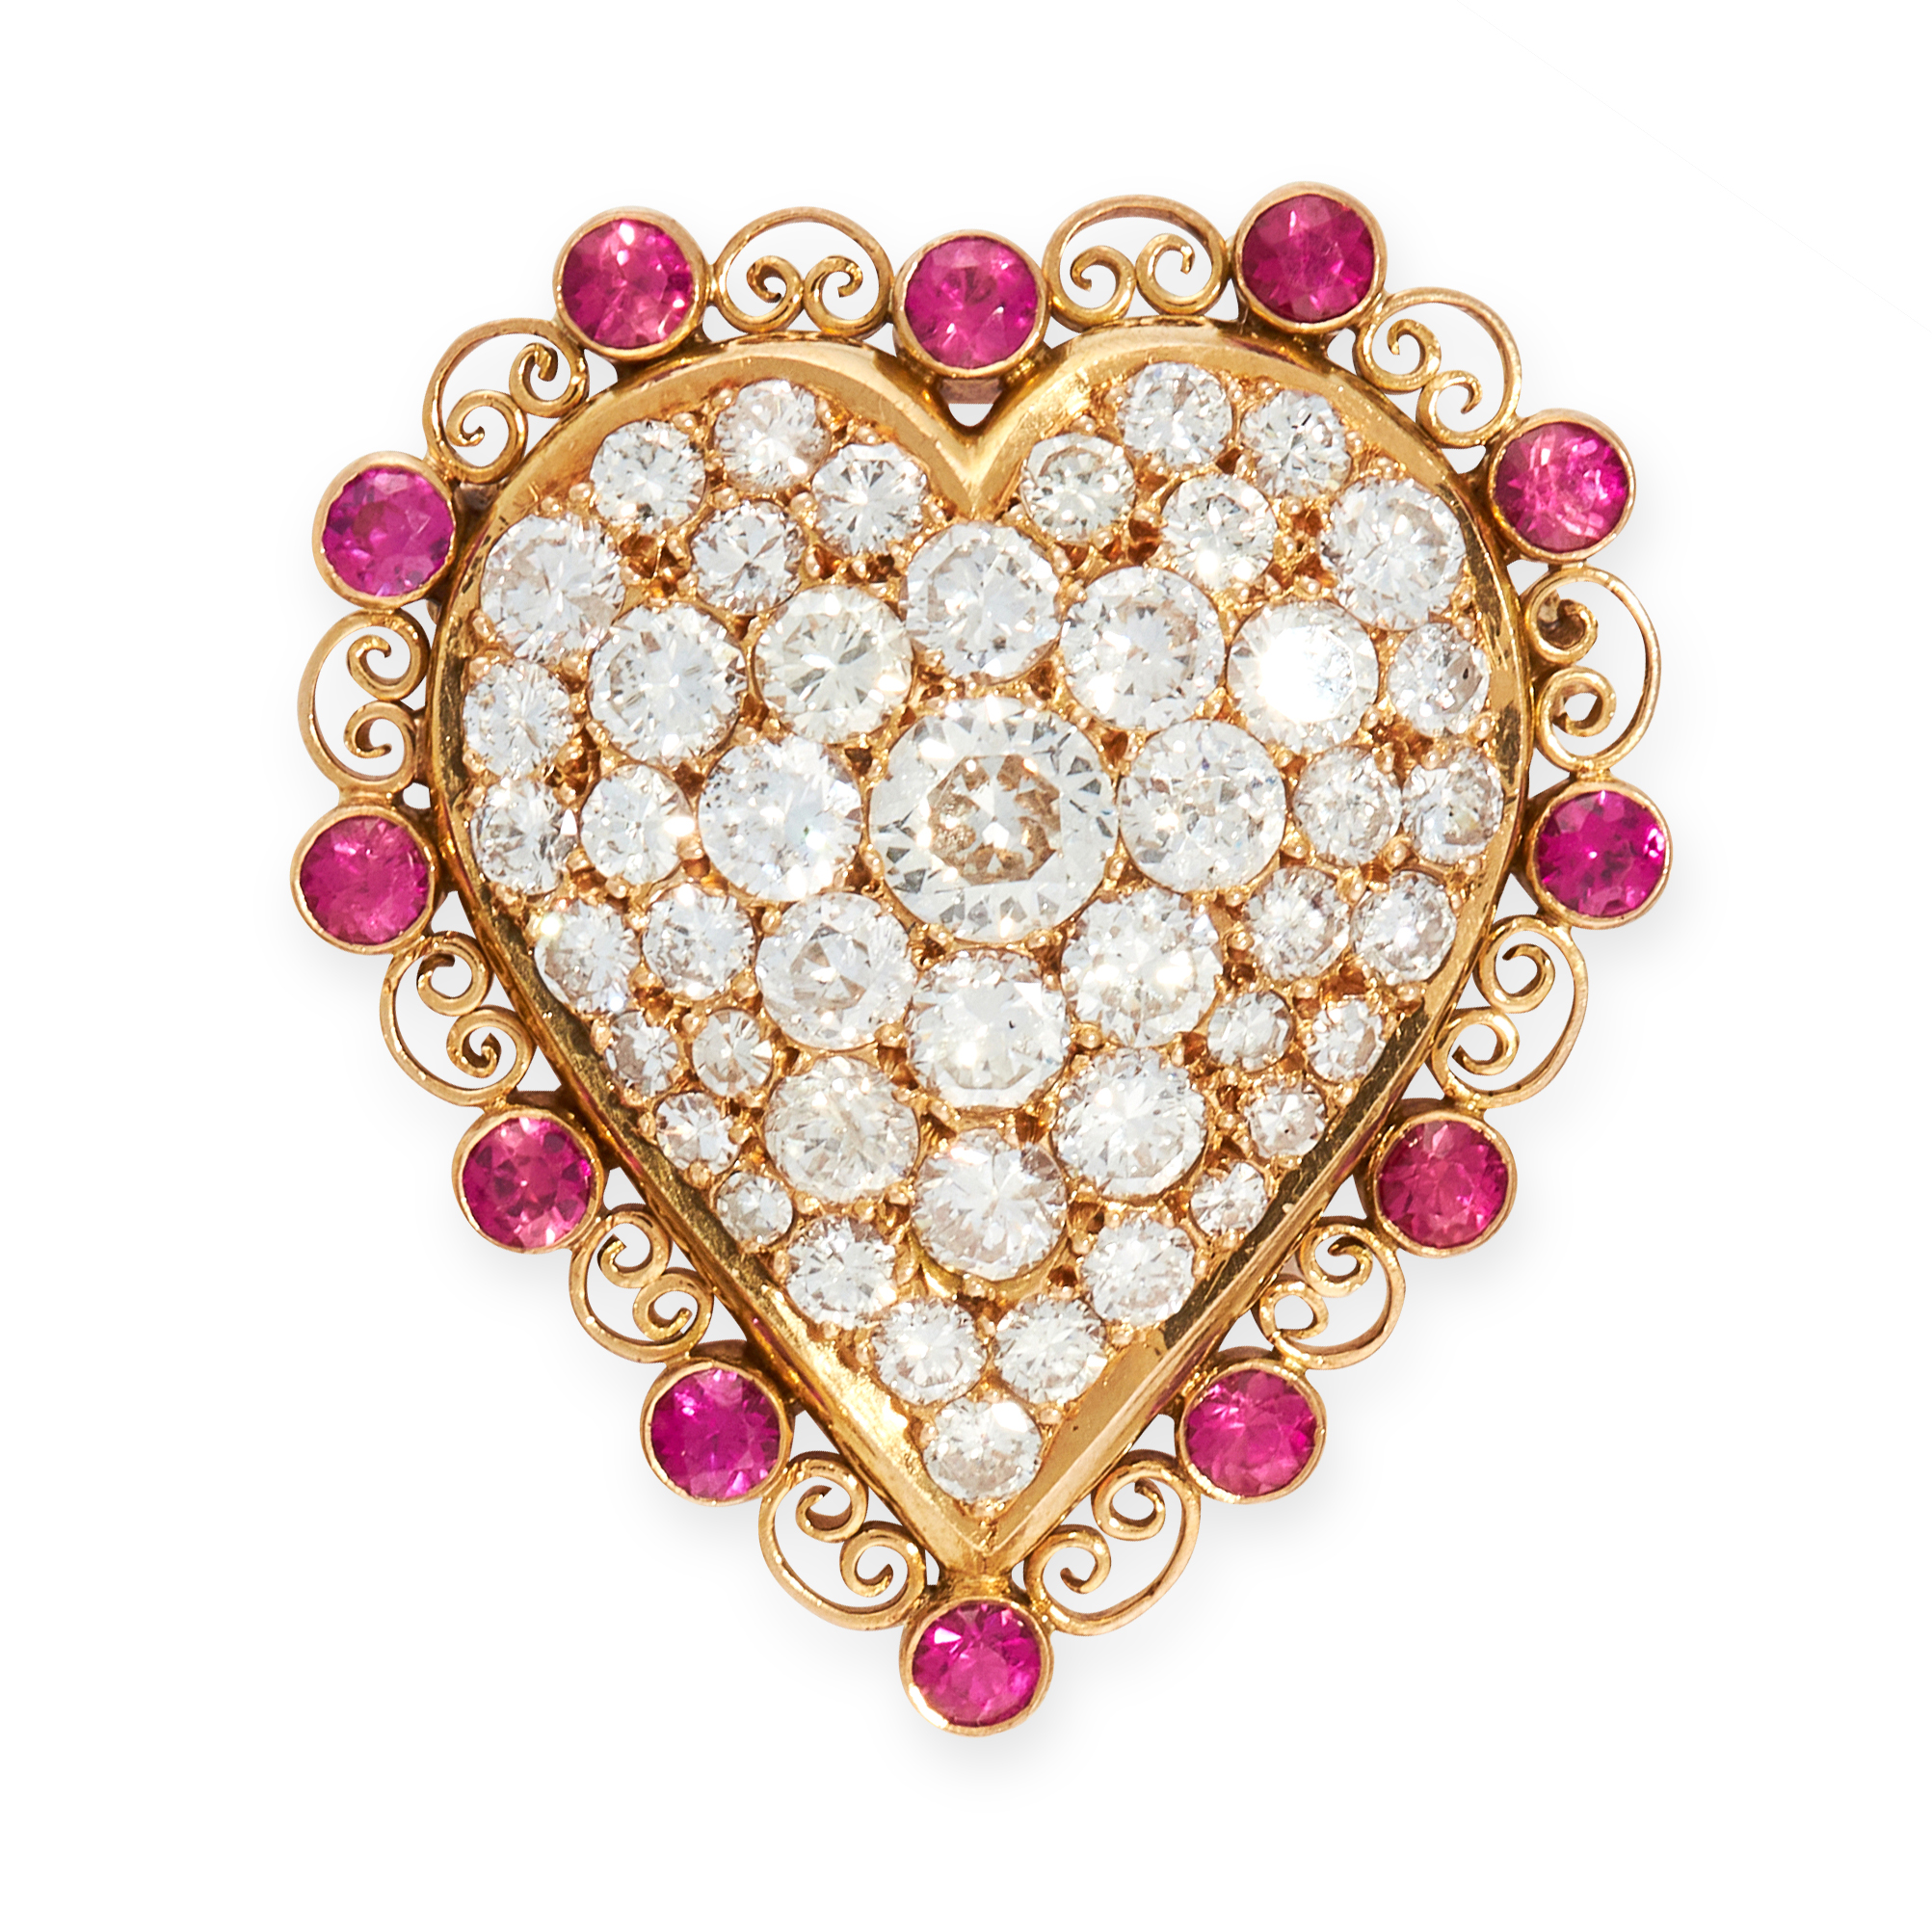 A DIAMOND AND RUBY HEART PENDANT in high carat yellow gold, in the shape of a heart, set with